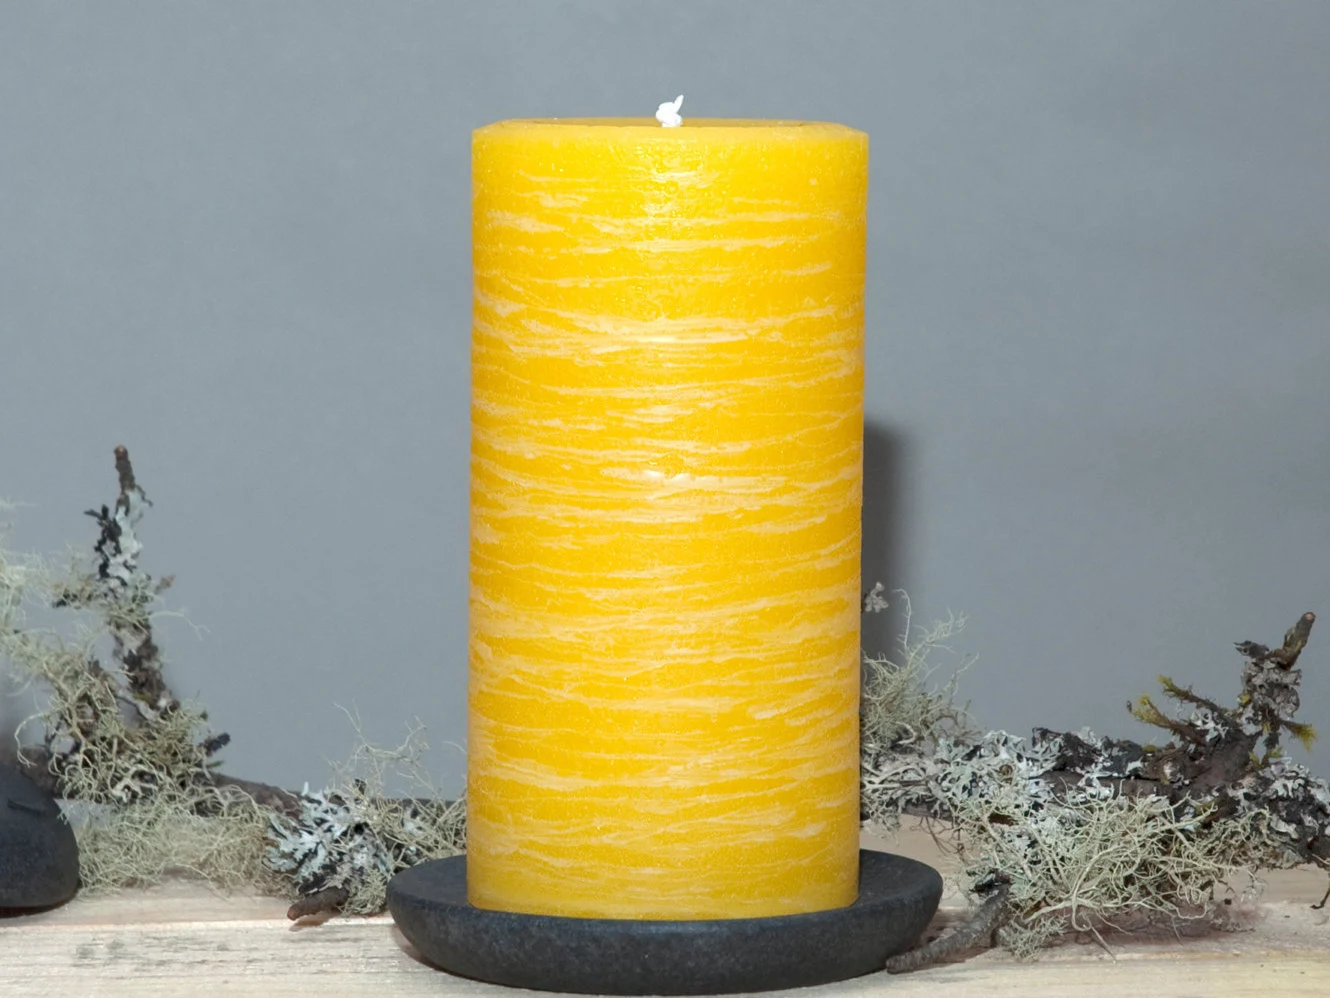 What Do Yellow Candles Symbolize